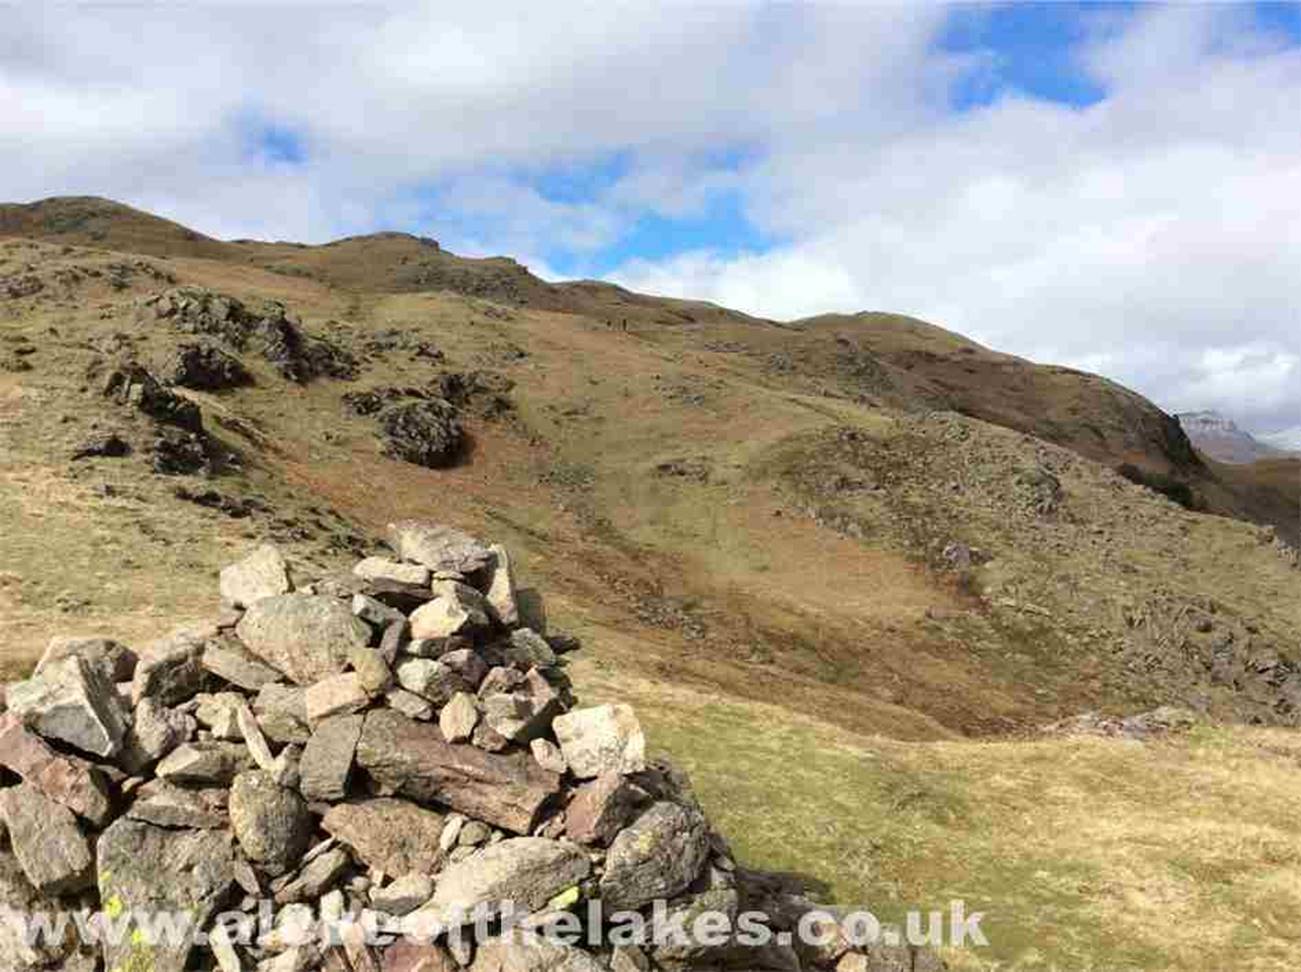 This is the Big Cairn that AW mentioned as a feature in  Book 3 that describes this walk